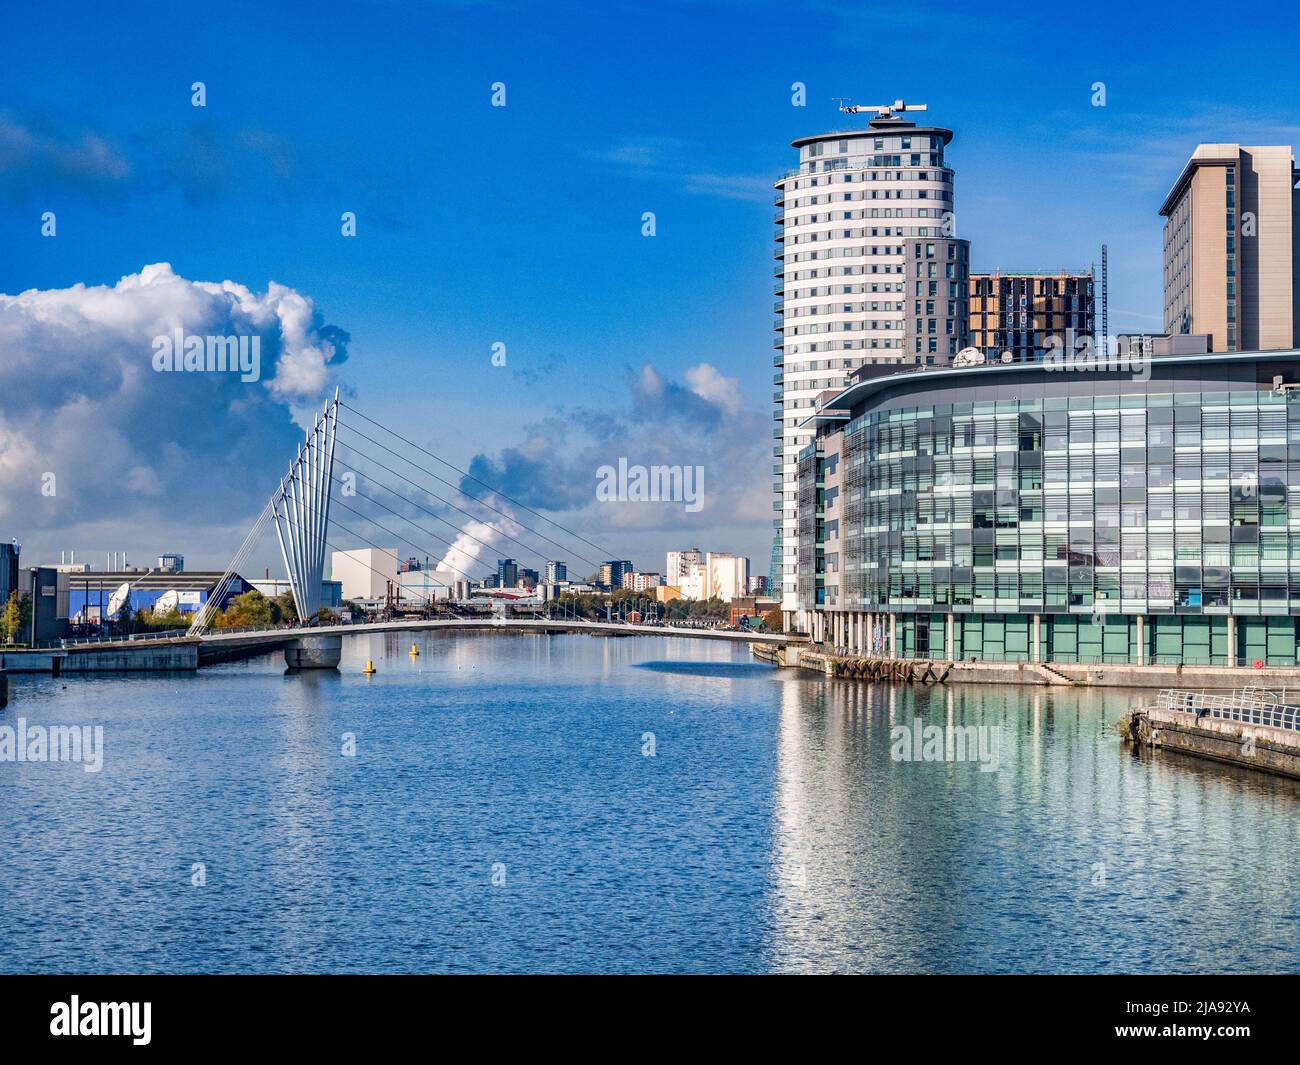 2 November 2018: Salford Quays, Manchester, UK - Media City Footbridge, and Manchester Ship Canal, on a beauitiful sunny winter morning. Stock Photo